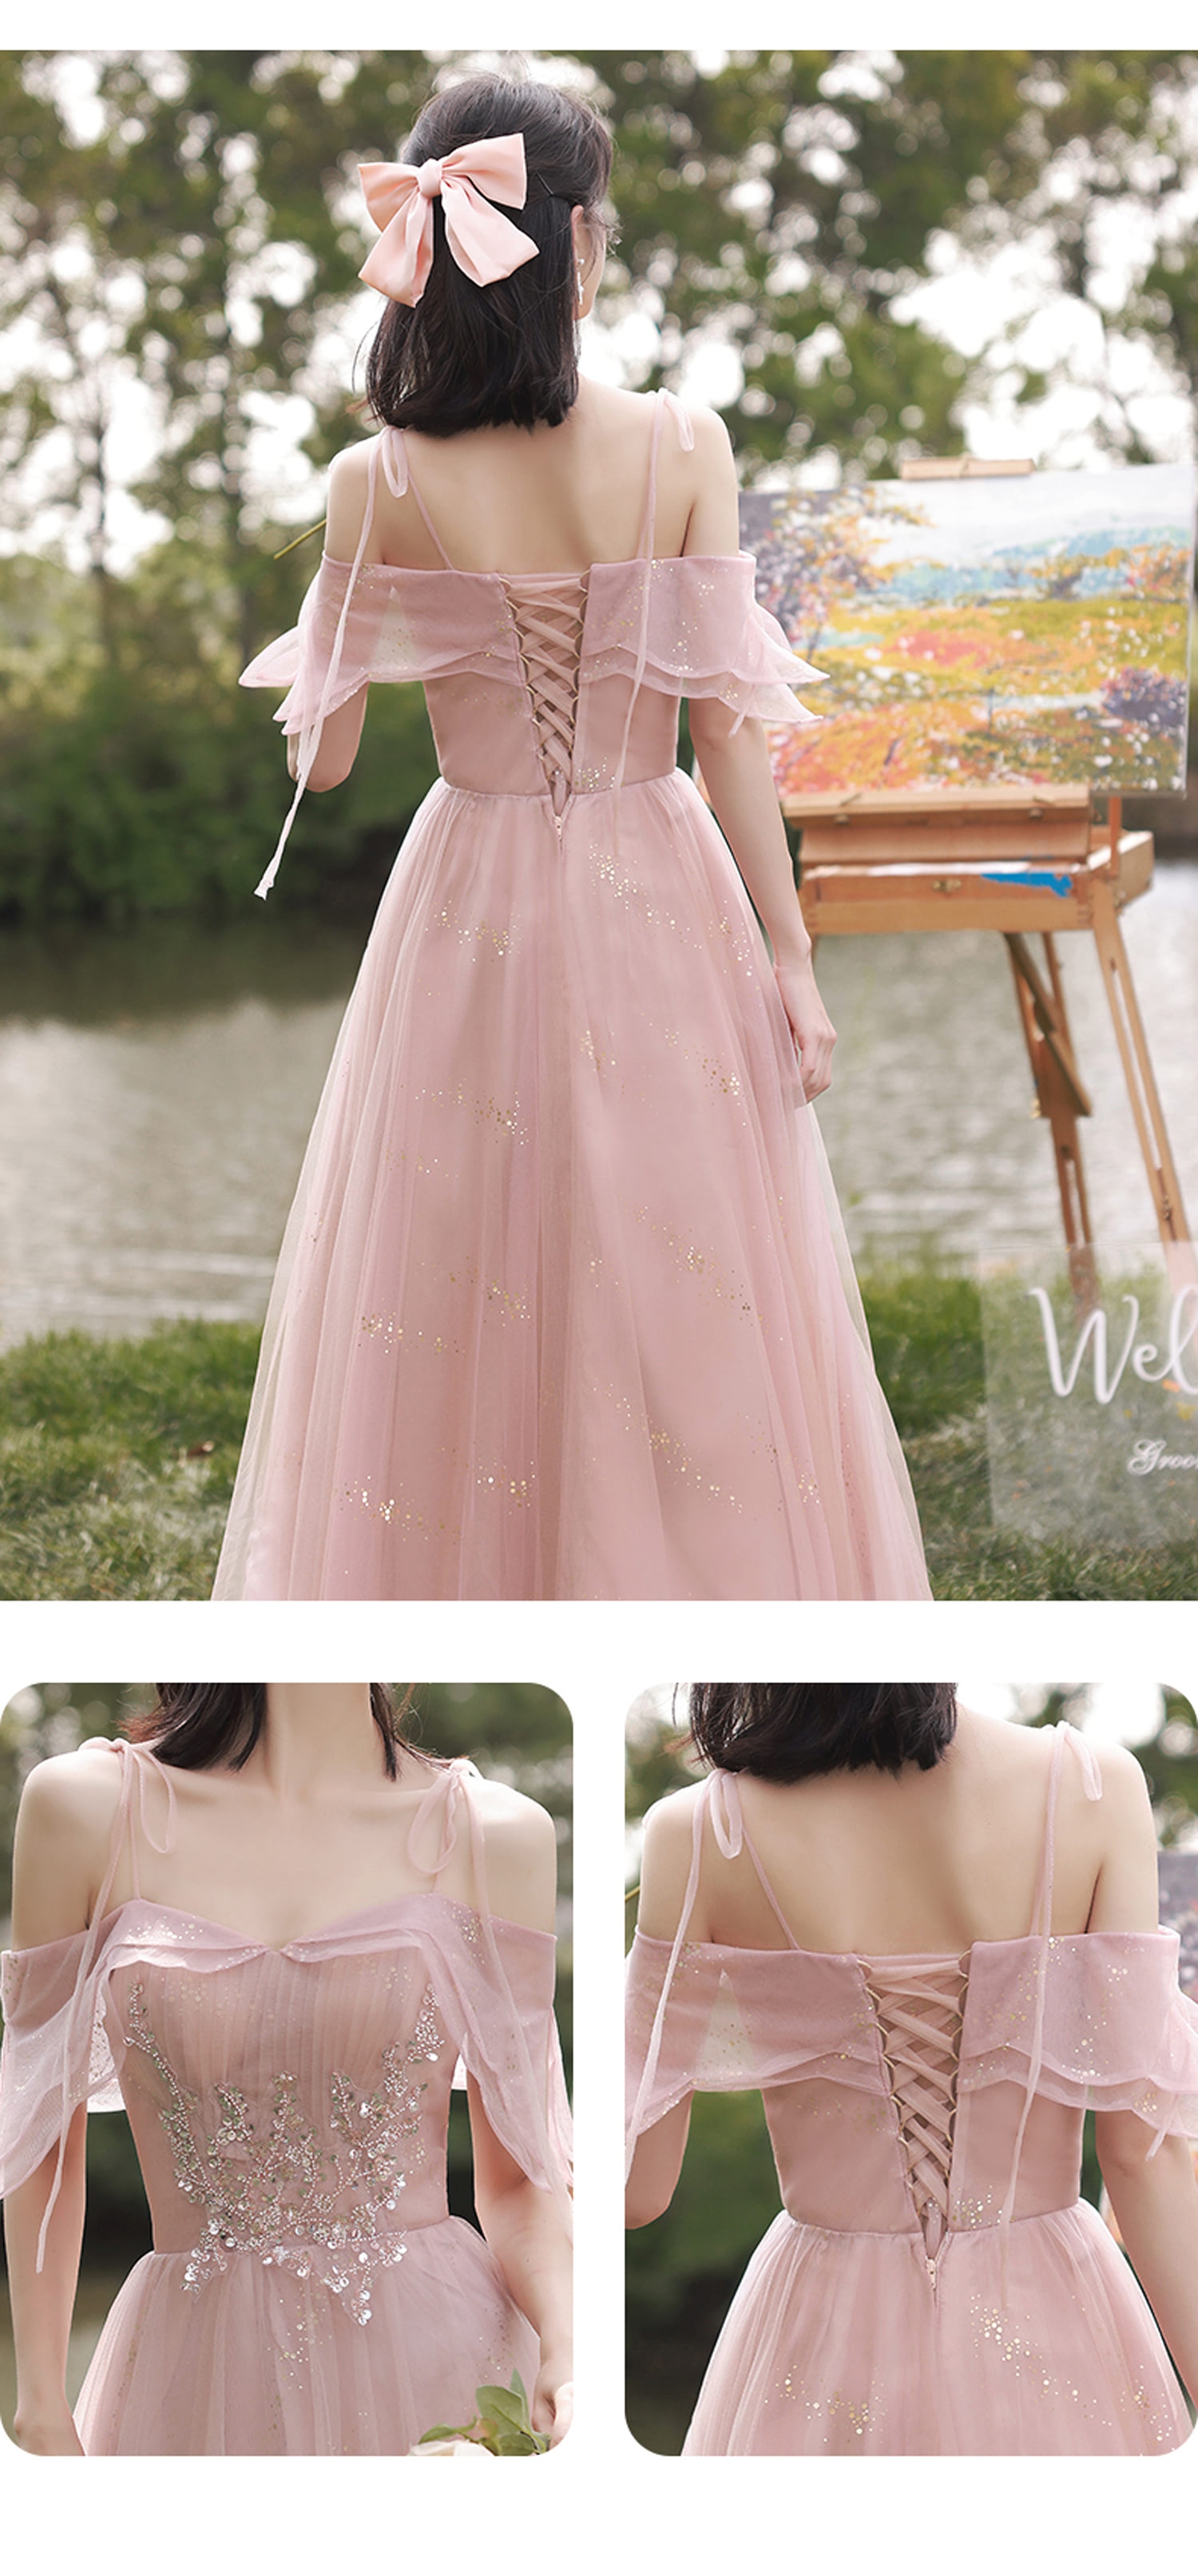 Romantic-Pink-Bridal-Party-Dress-Elegant-Occasions-Formal-Gown17.jpg